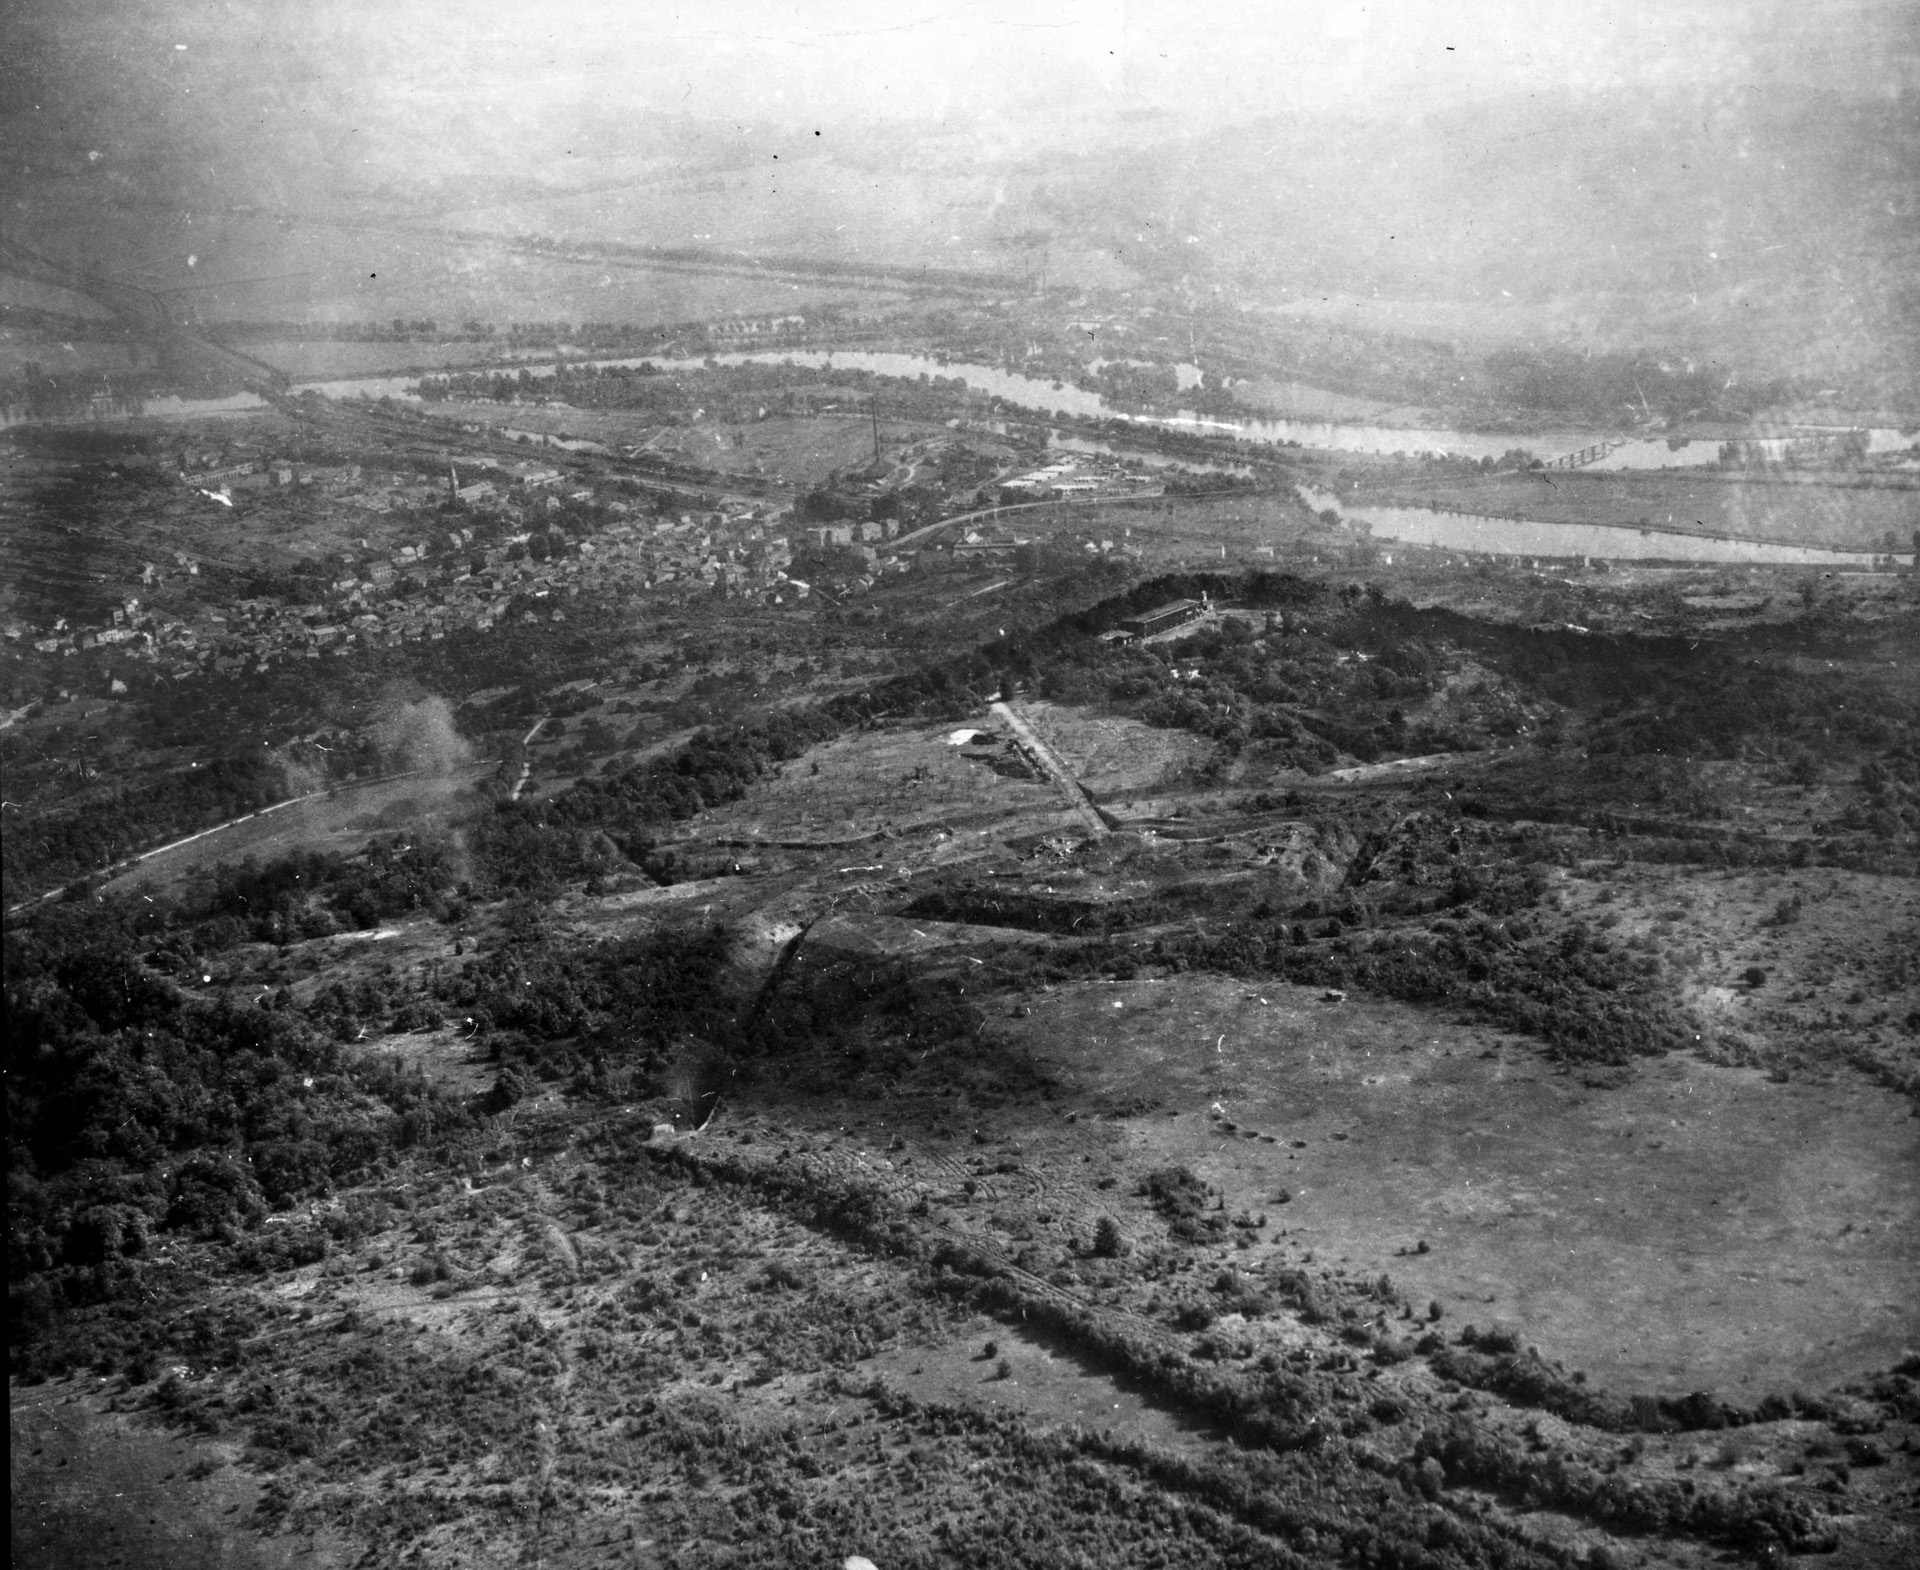 German-held Fort Driant, built in 1902 and located five miles southwest of Metz, France, was a strategic nemesis impeding Patton’s drive into Germany in late 1944. Perched high on a hill, and with a 300-man garrison, the fort was well sited to prevent crossings of the nearby Moselle River, visible in the background. 